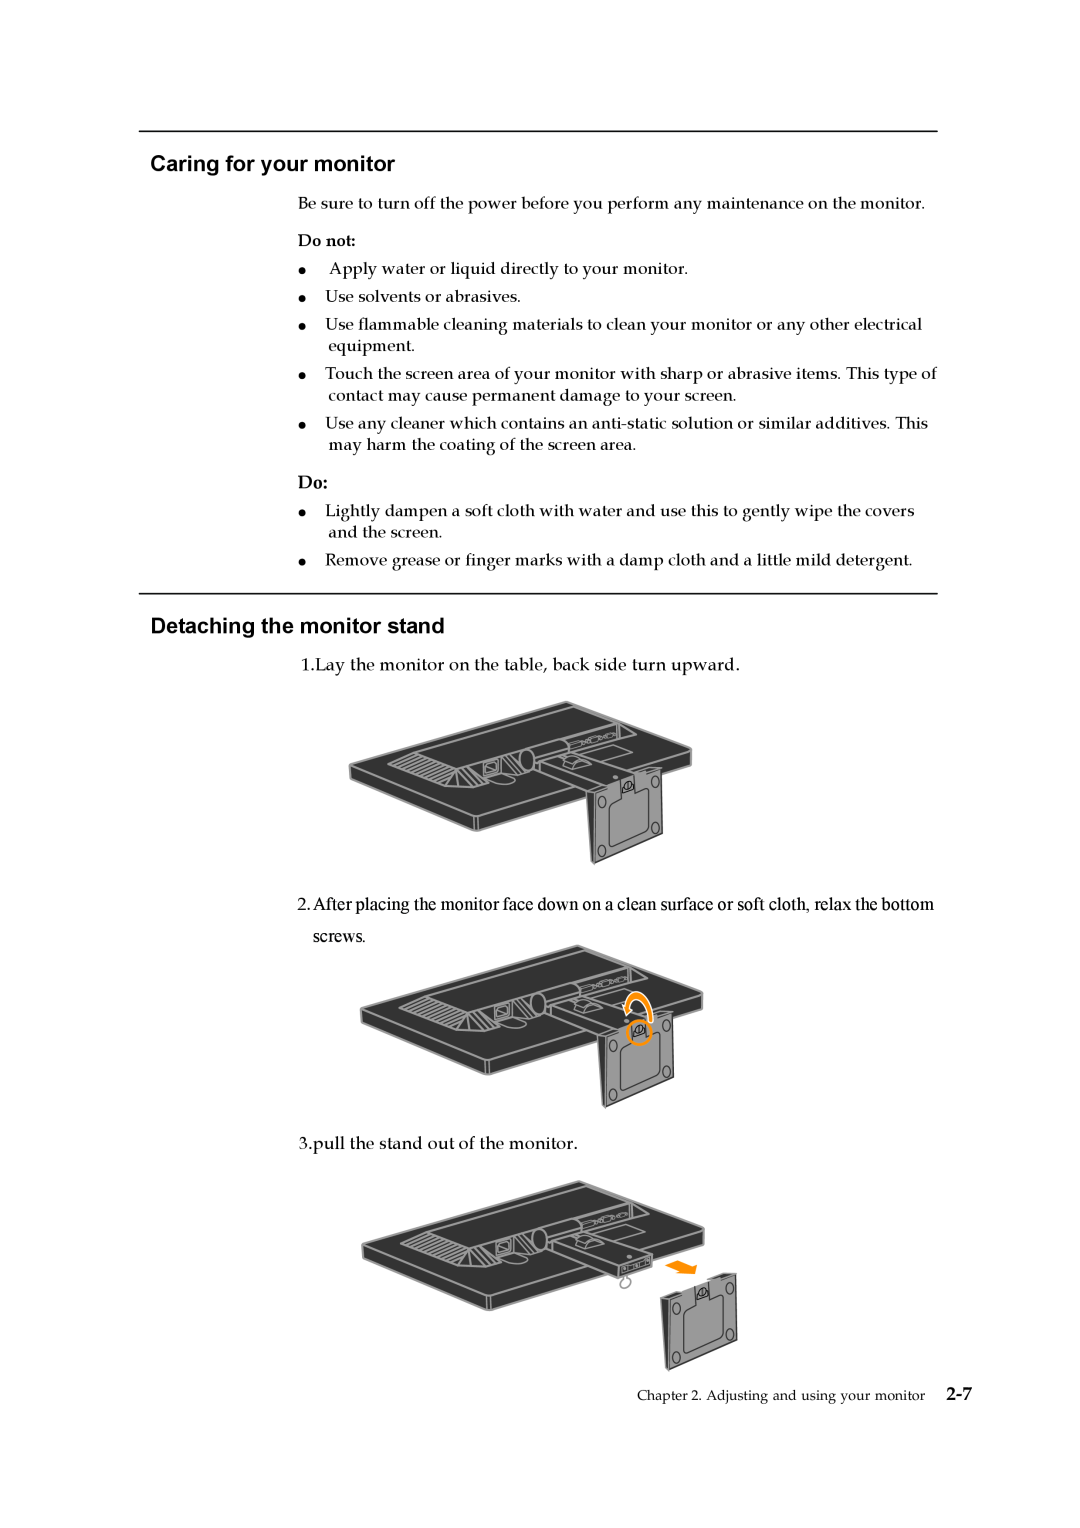 Lenovo 2448MB6 manual Caring for your monitor, Detaching the monitor stand, Do not 